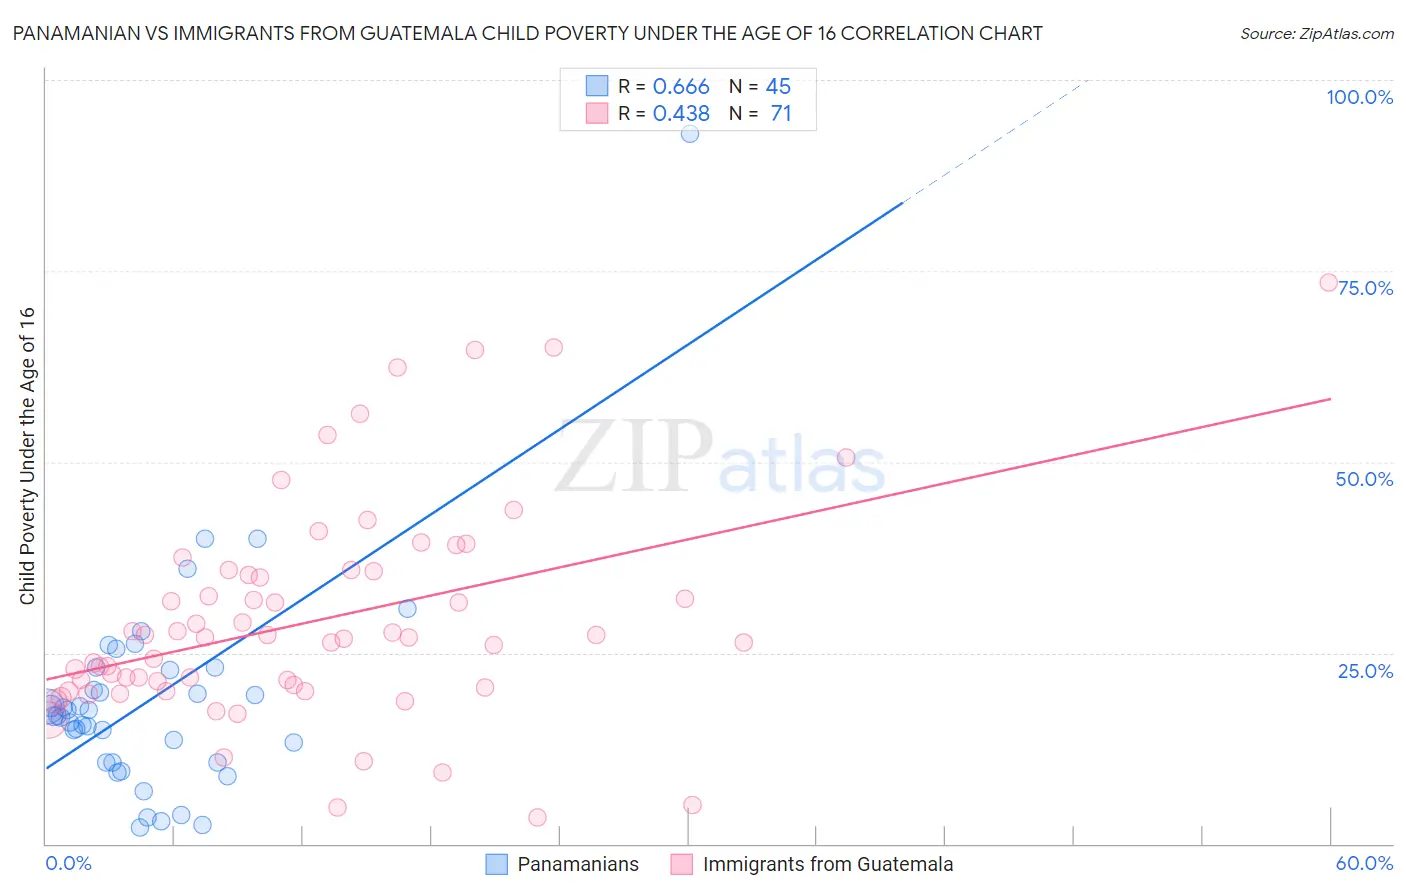 Panamanian vs Immigrants from Guatemala Child Poverty Under the Age of 16